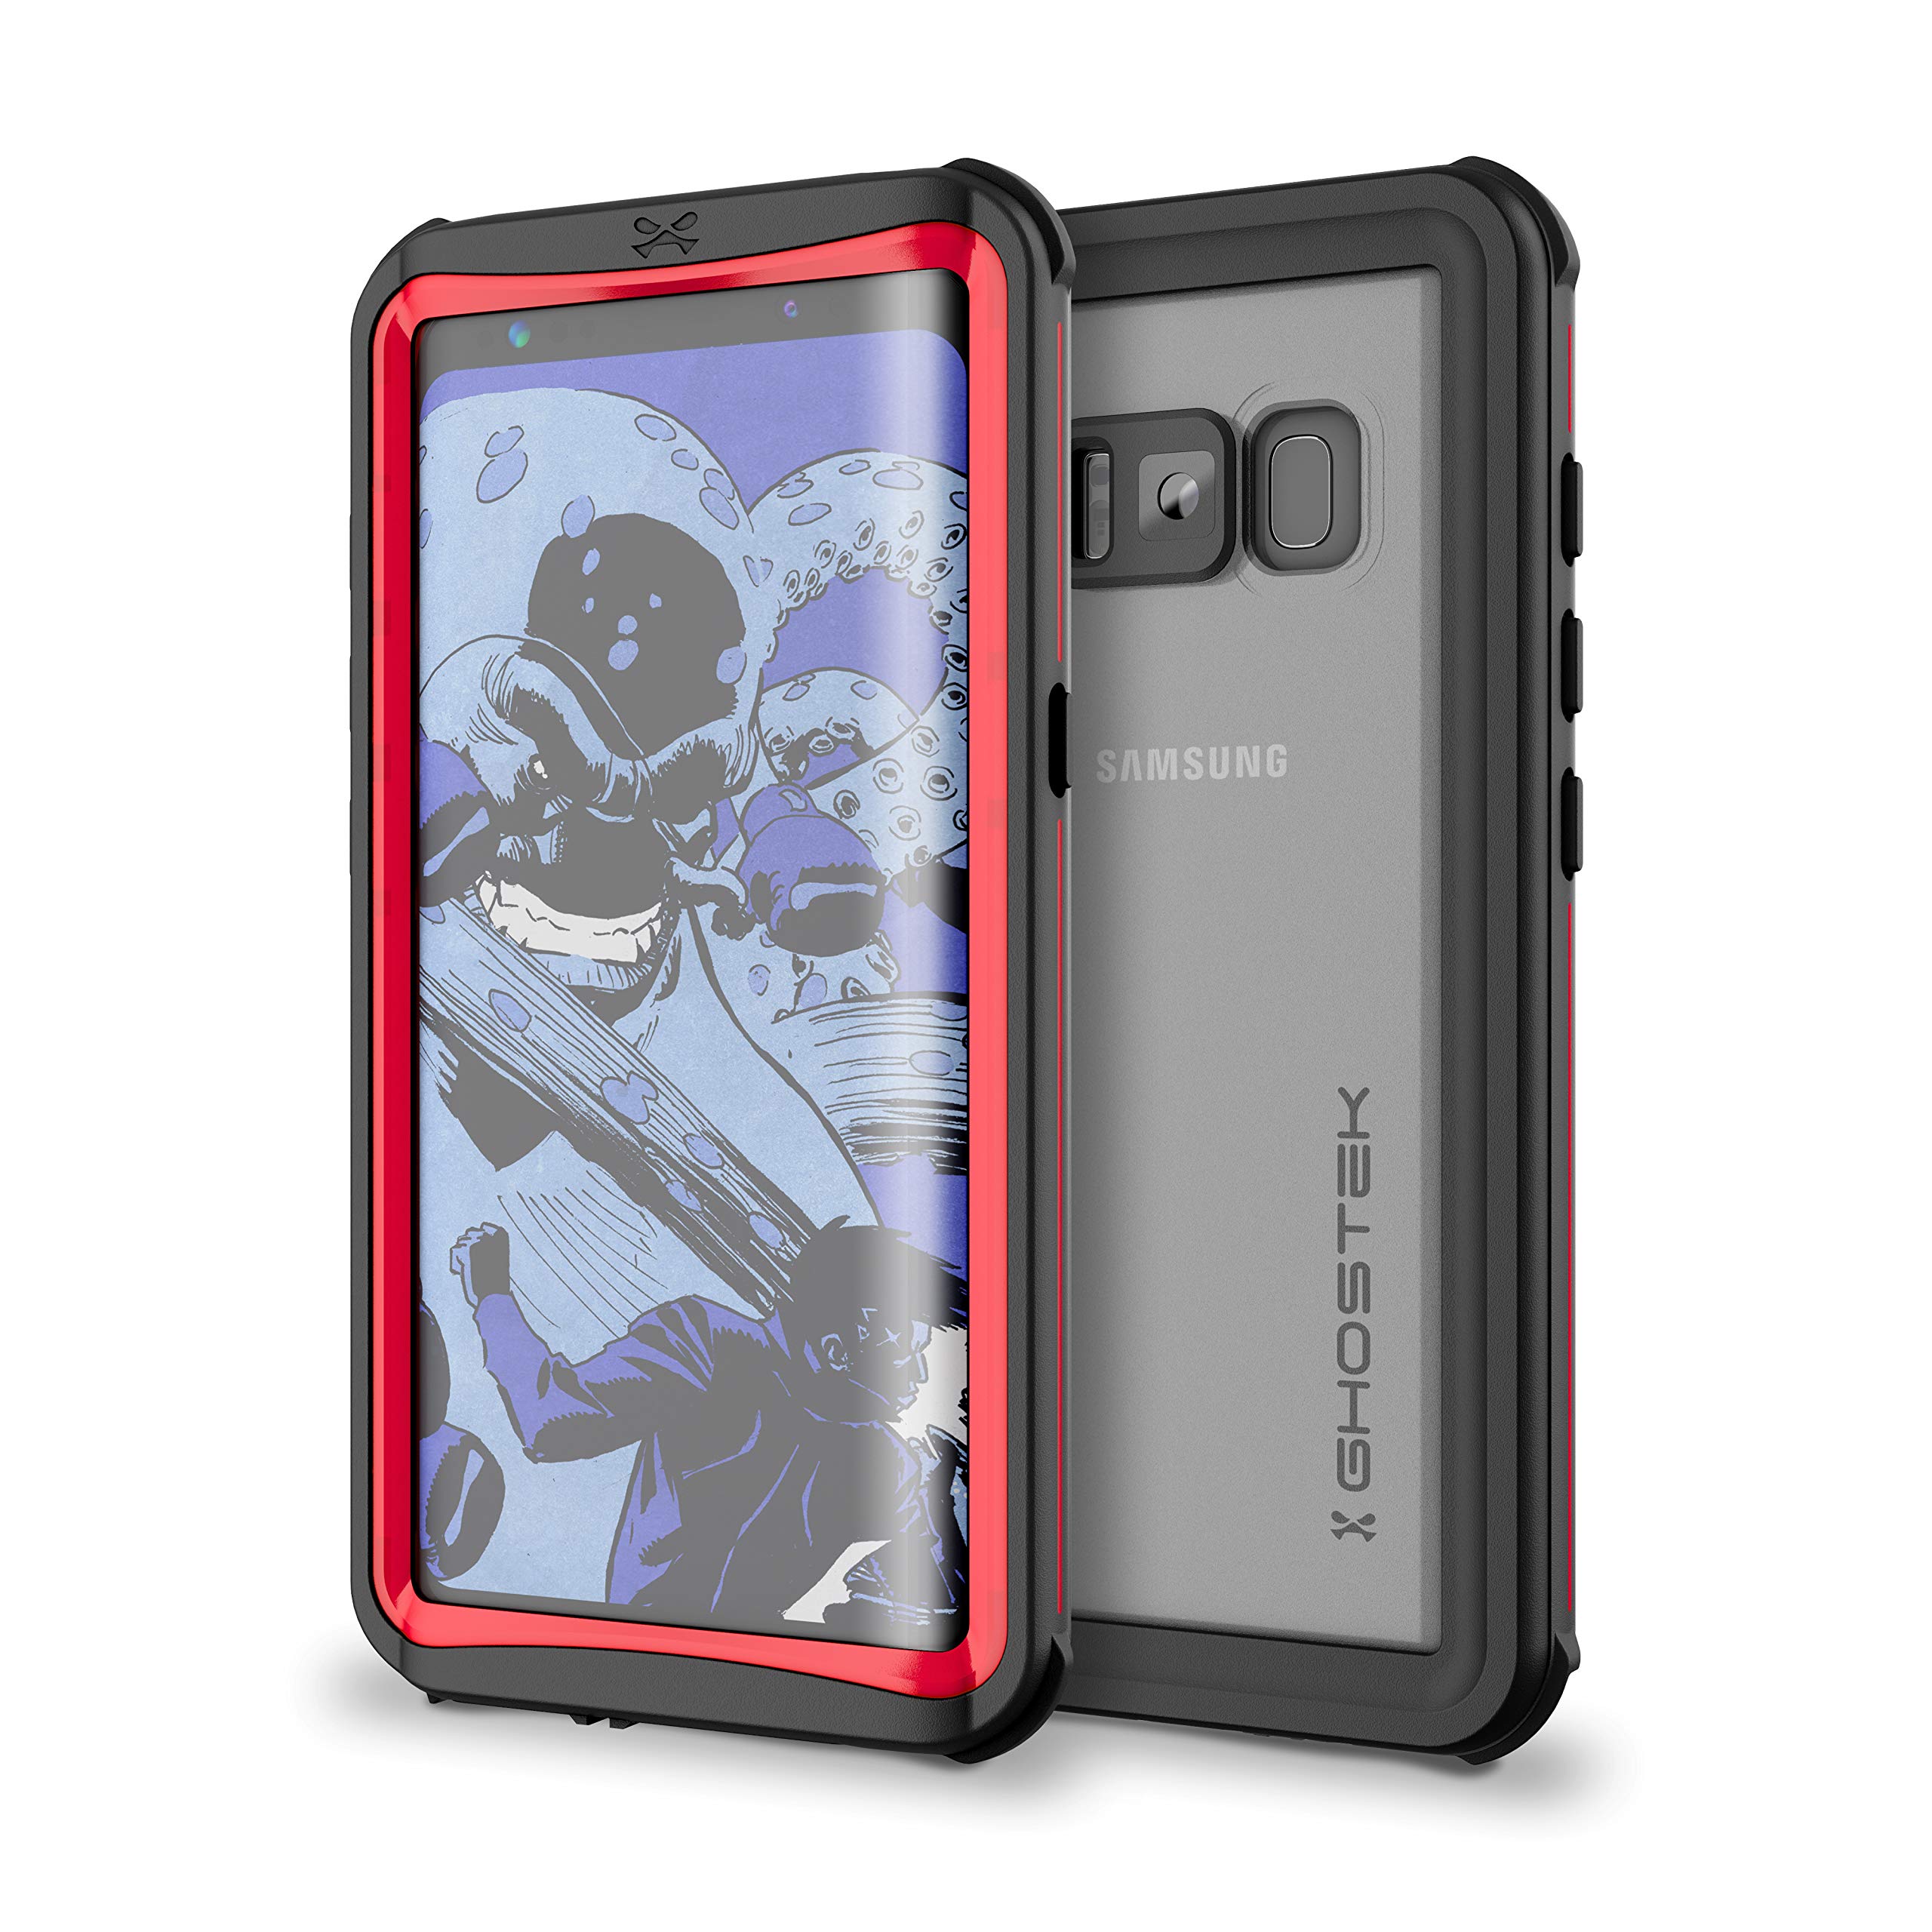 Ghostek Nautical Galaxy S8 Waterproof Case with Screen Protector Extreme Heavy Duty Protection Full Body Shell Underwater Watertight Seal Shockproof Designed for 2017 Galaxy S8 (5.8 Inch) - (Red)